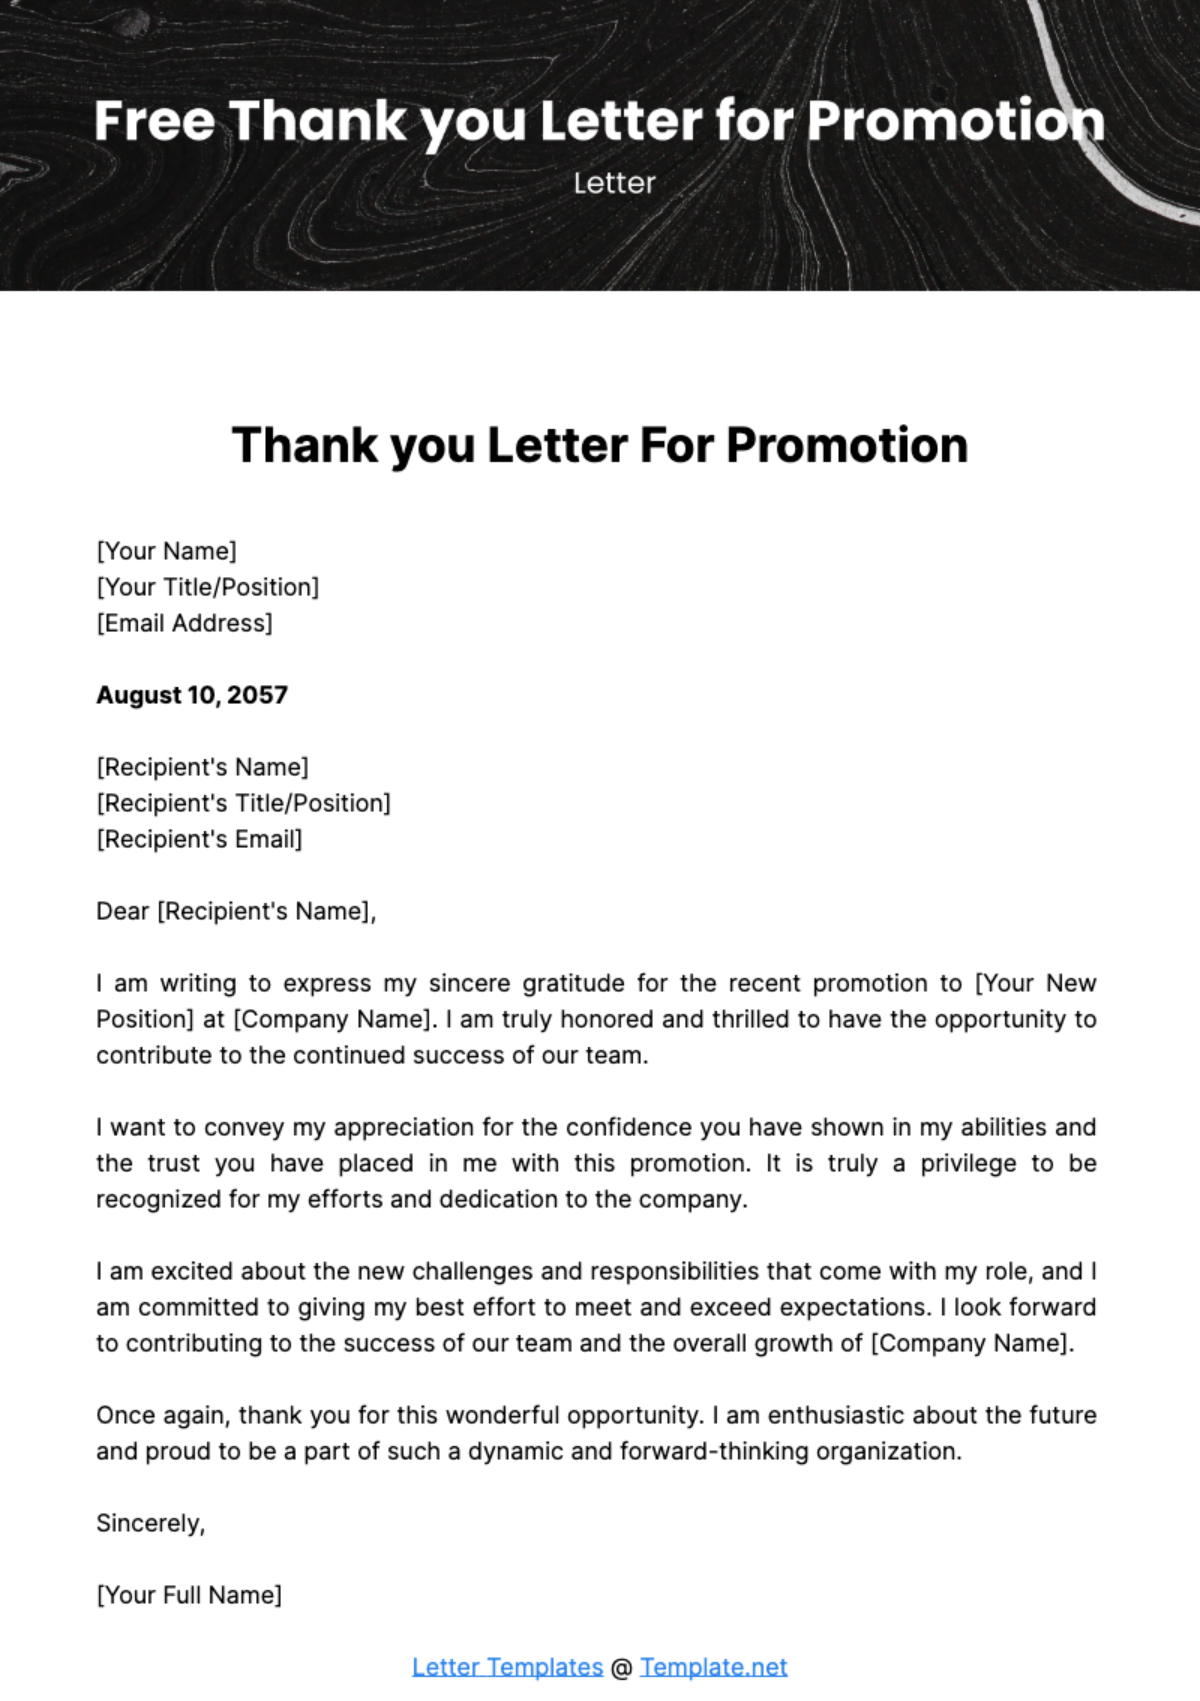 Free Thank you Letter for Promotion Template